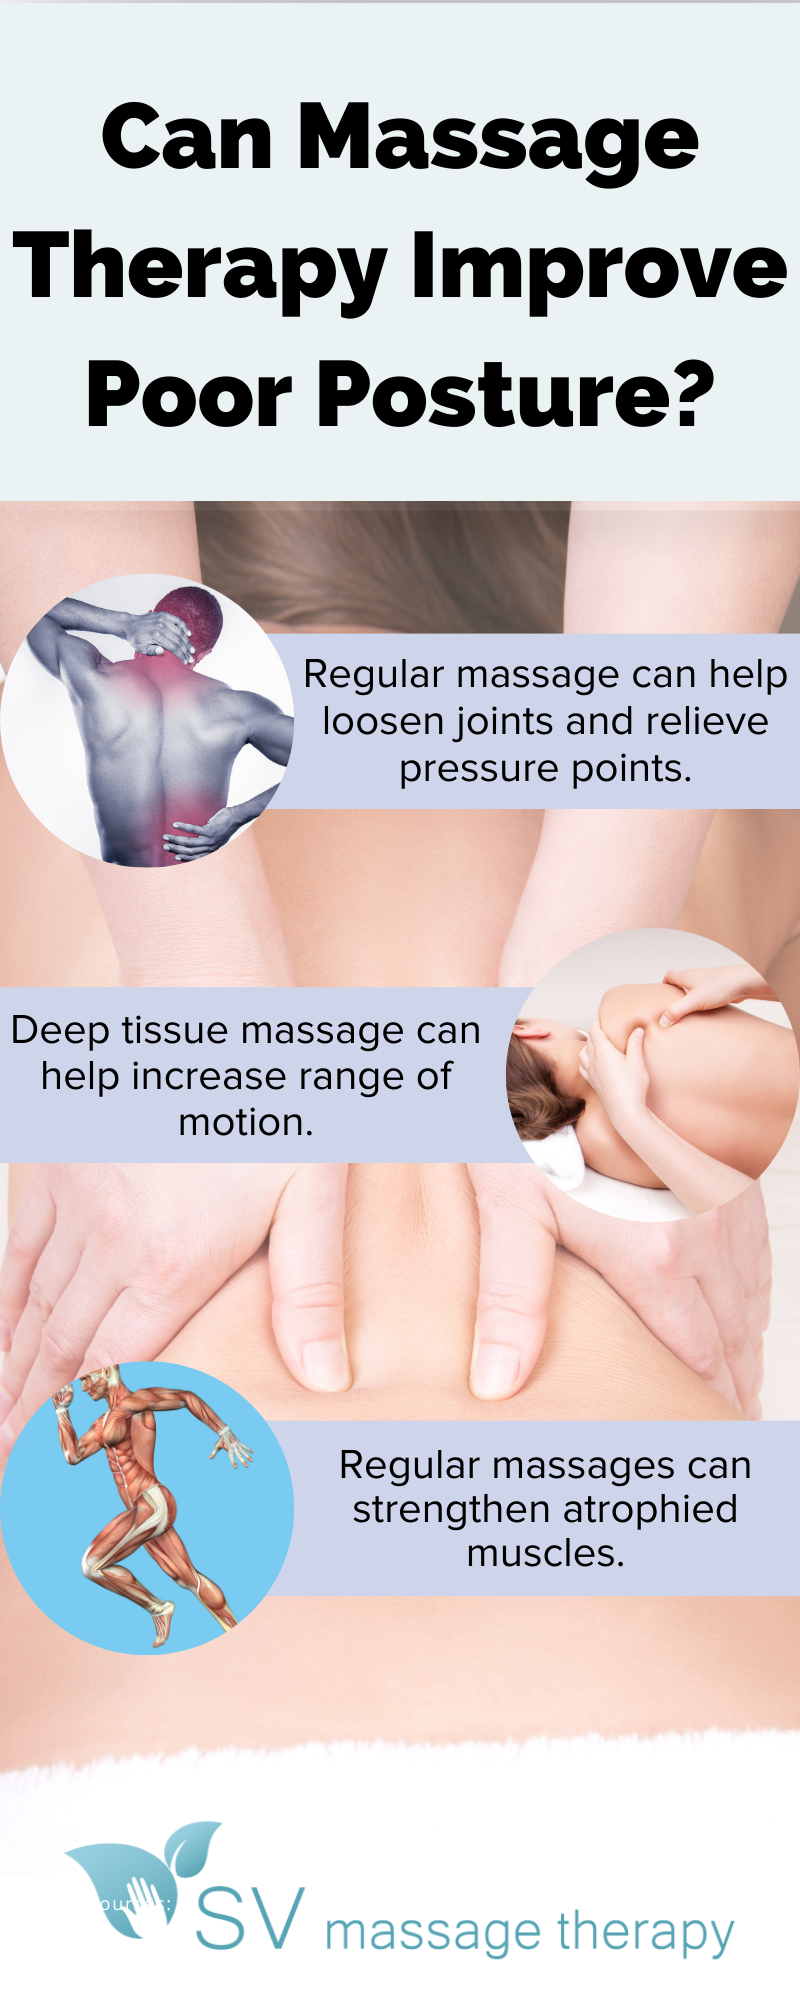 information about how massage therapy can improve posture